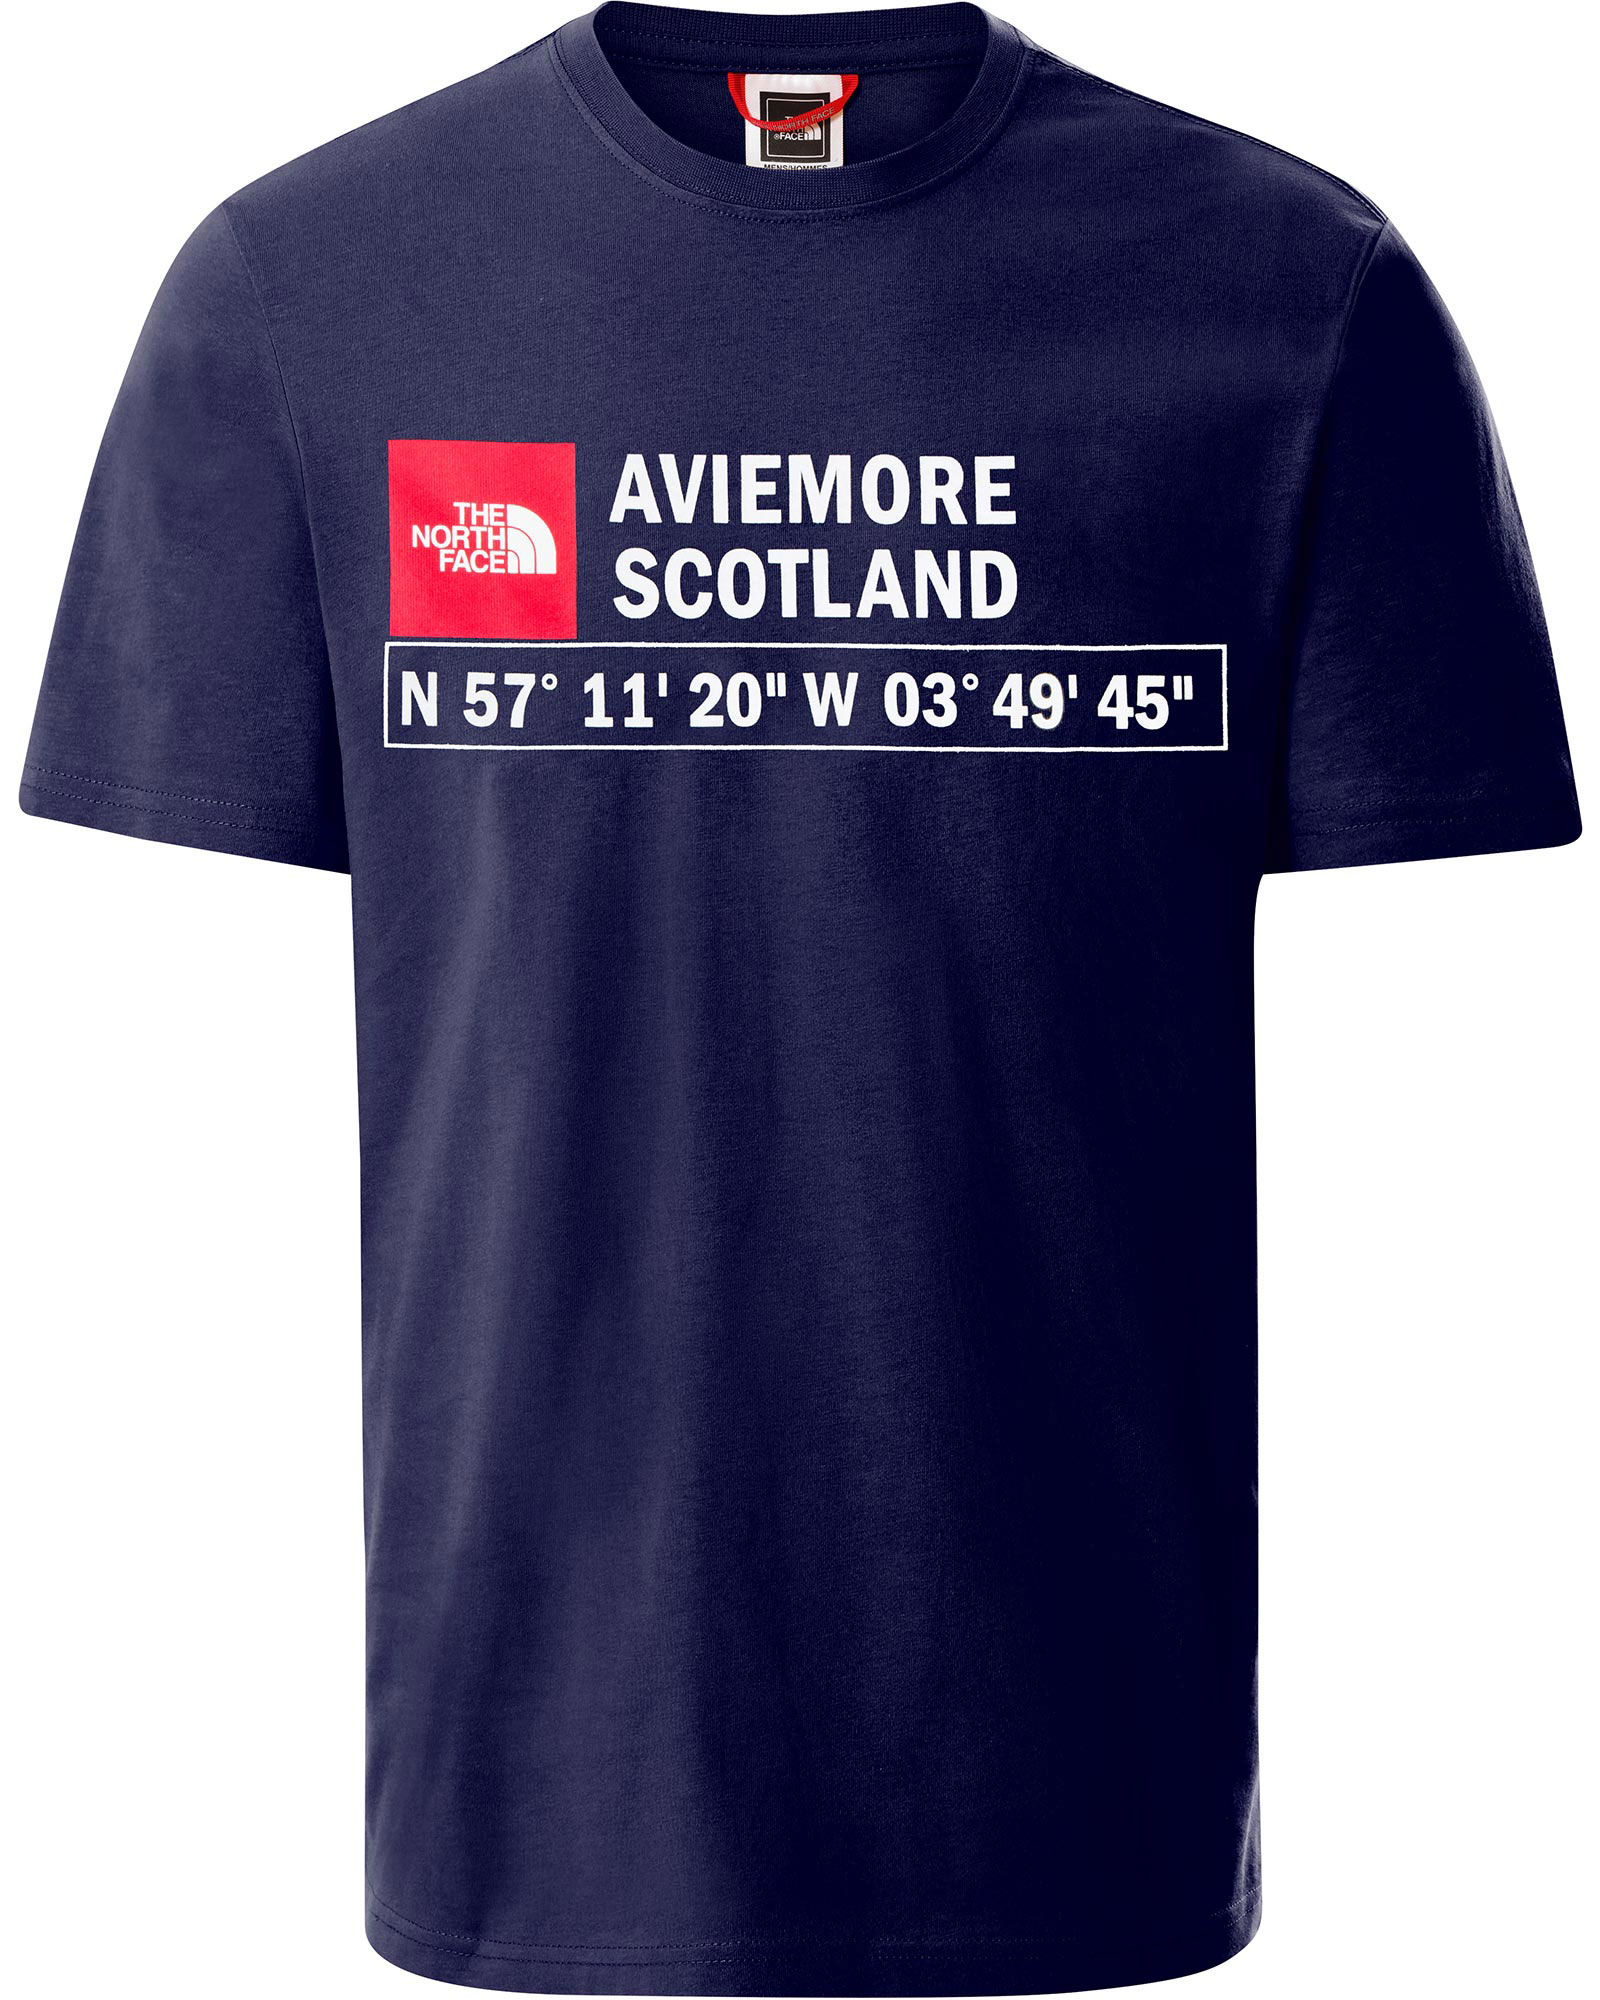 Product image of The North Face GPS Logo Men's T-Shirt Aviemore